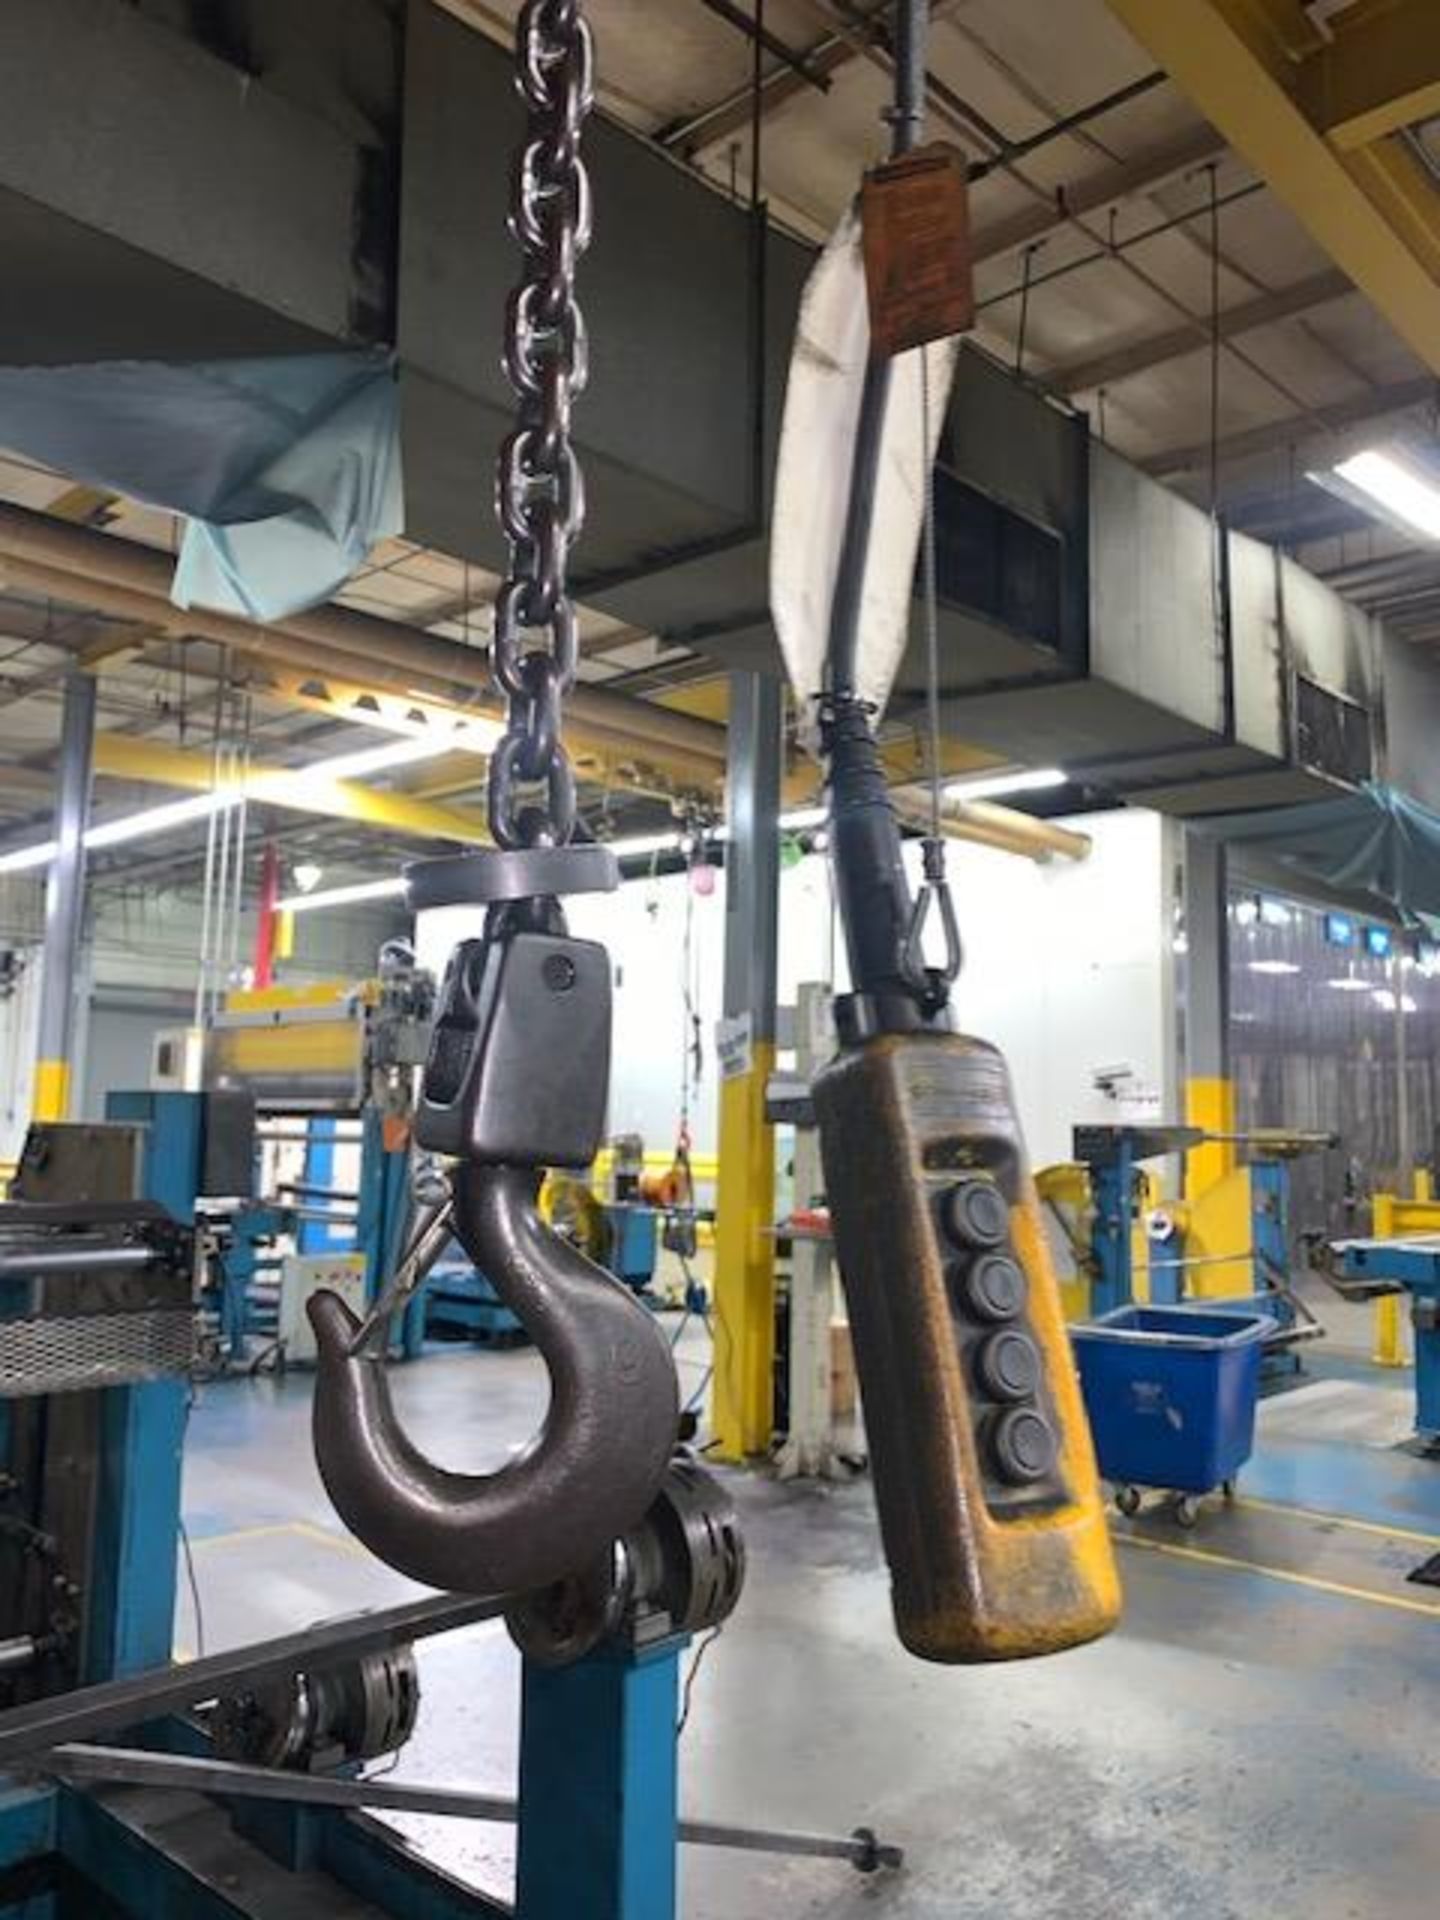 1 Ton Budgit Electric Chain Hoist, w/ Power Trolley & Pendant Controlled - Image 3 of 5